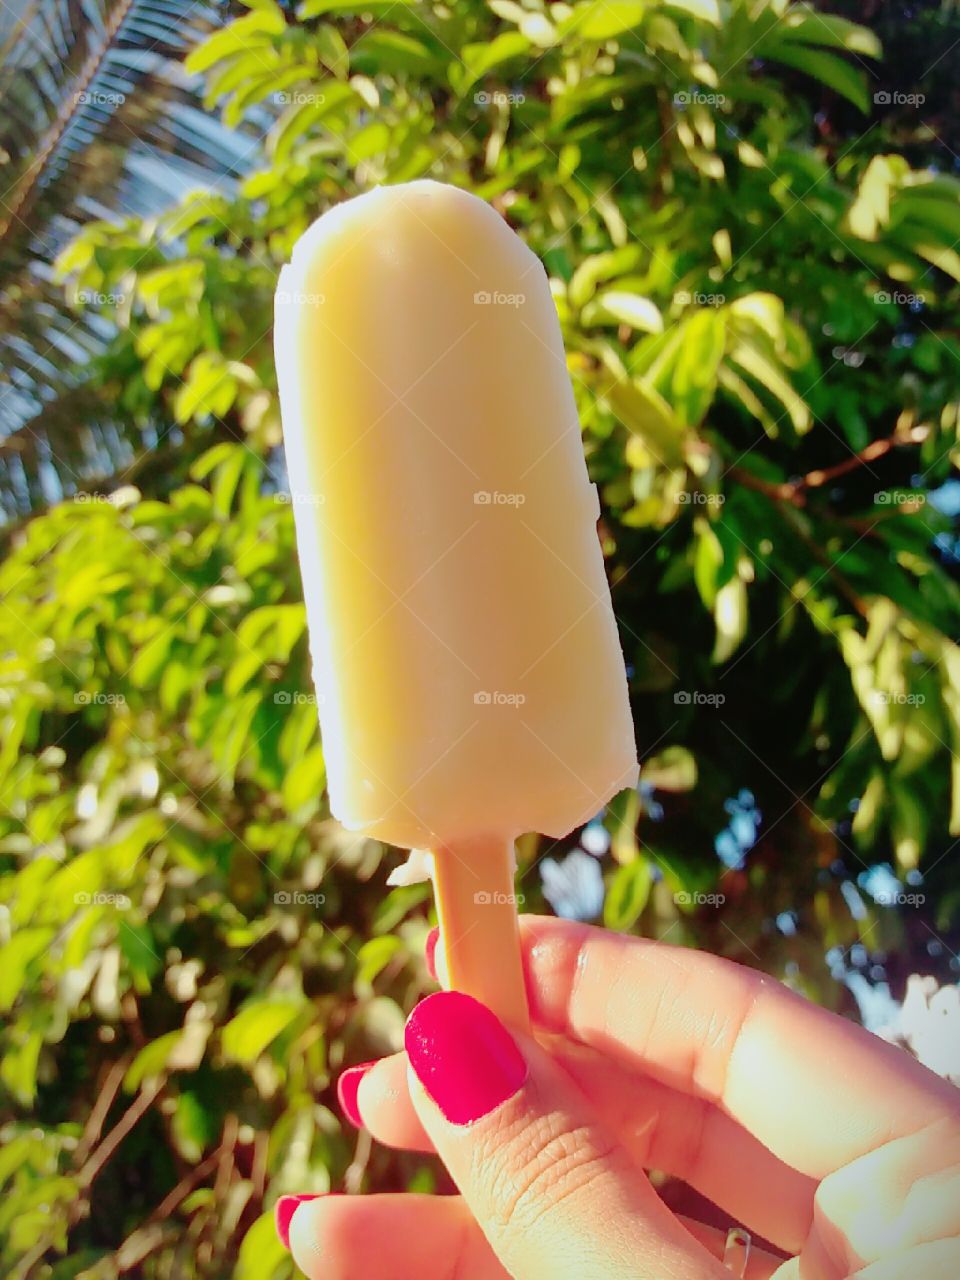 a homemade popsicle in 2019?